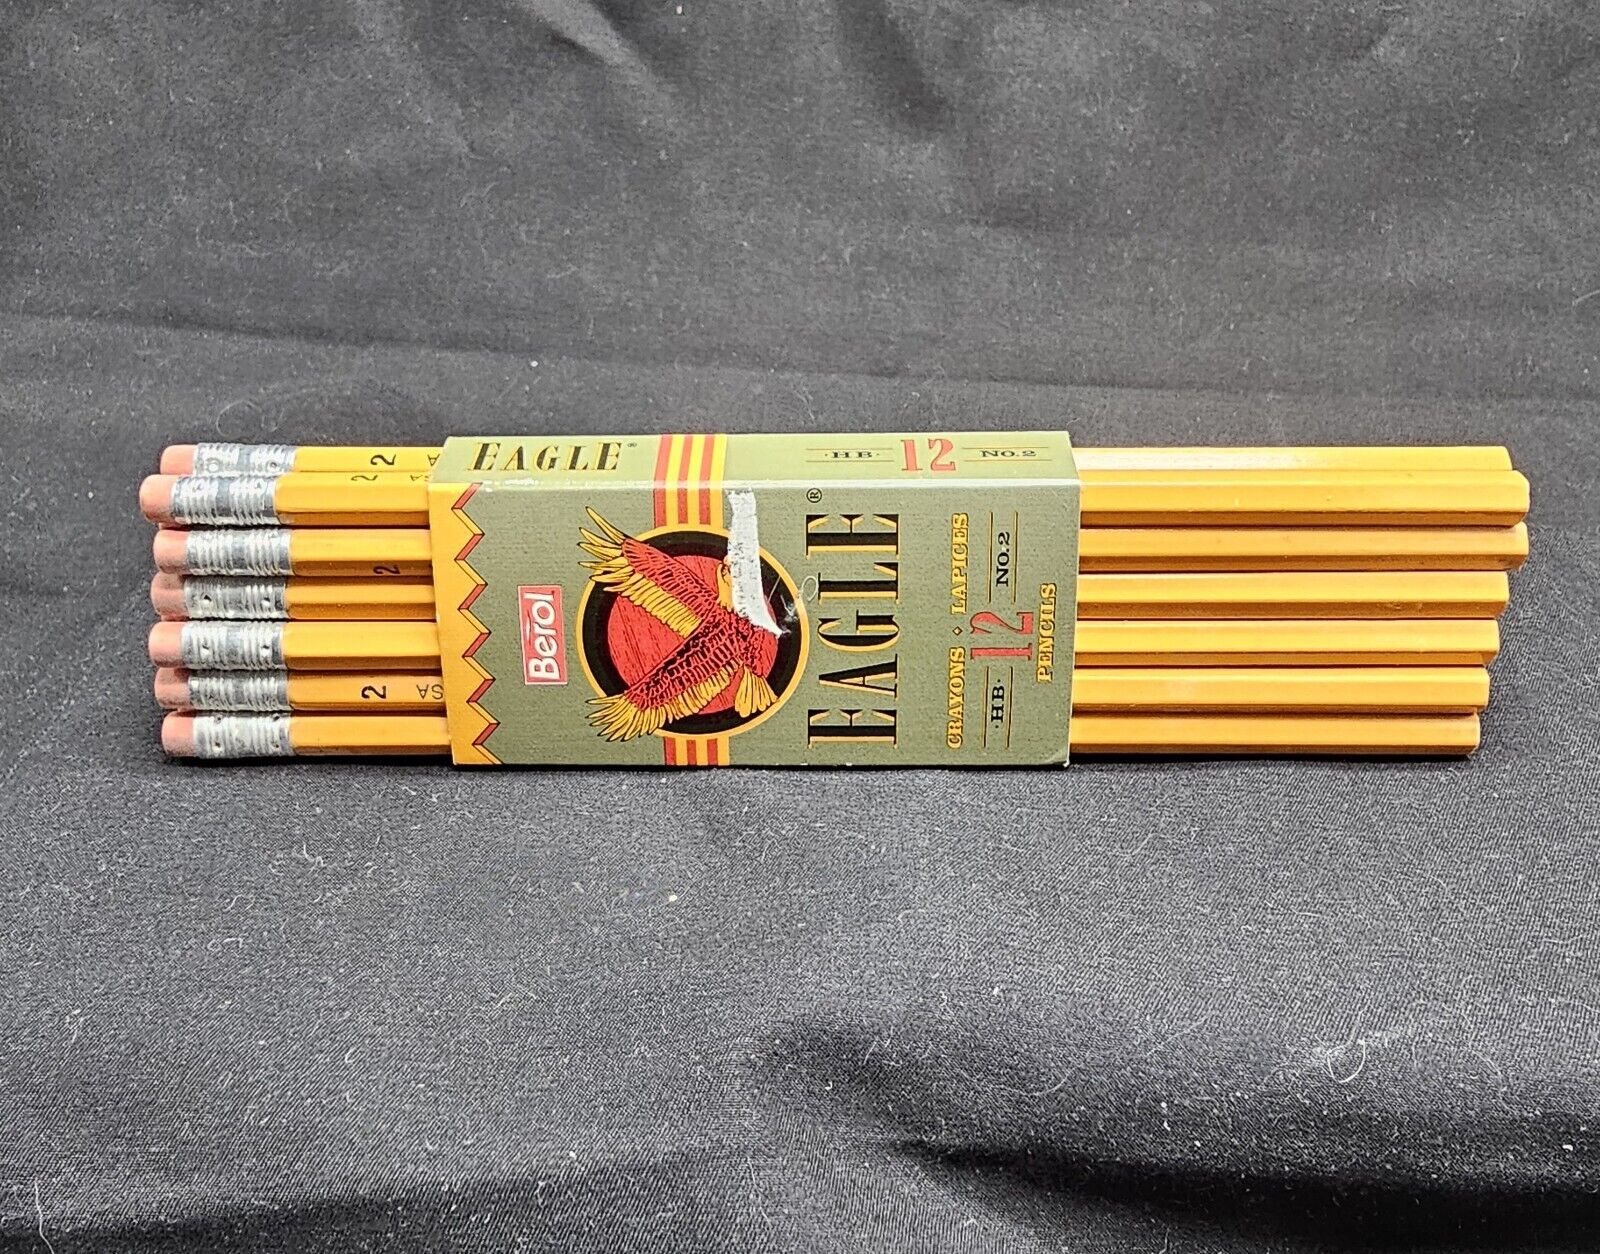 Vintage Berol Eagle HB No. 2 Pencil (Made in USA, 1993) Pack of 12